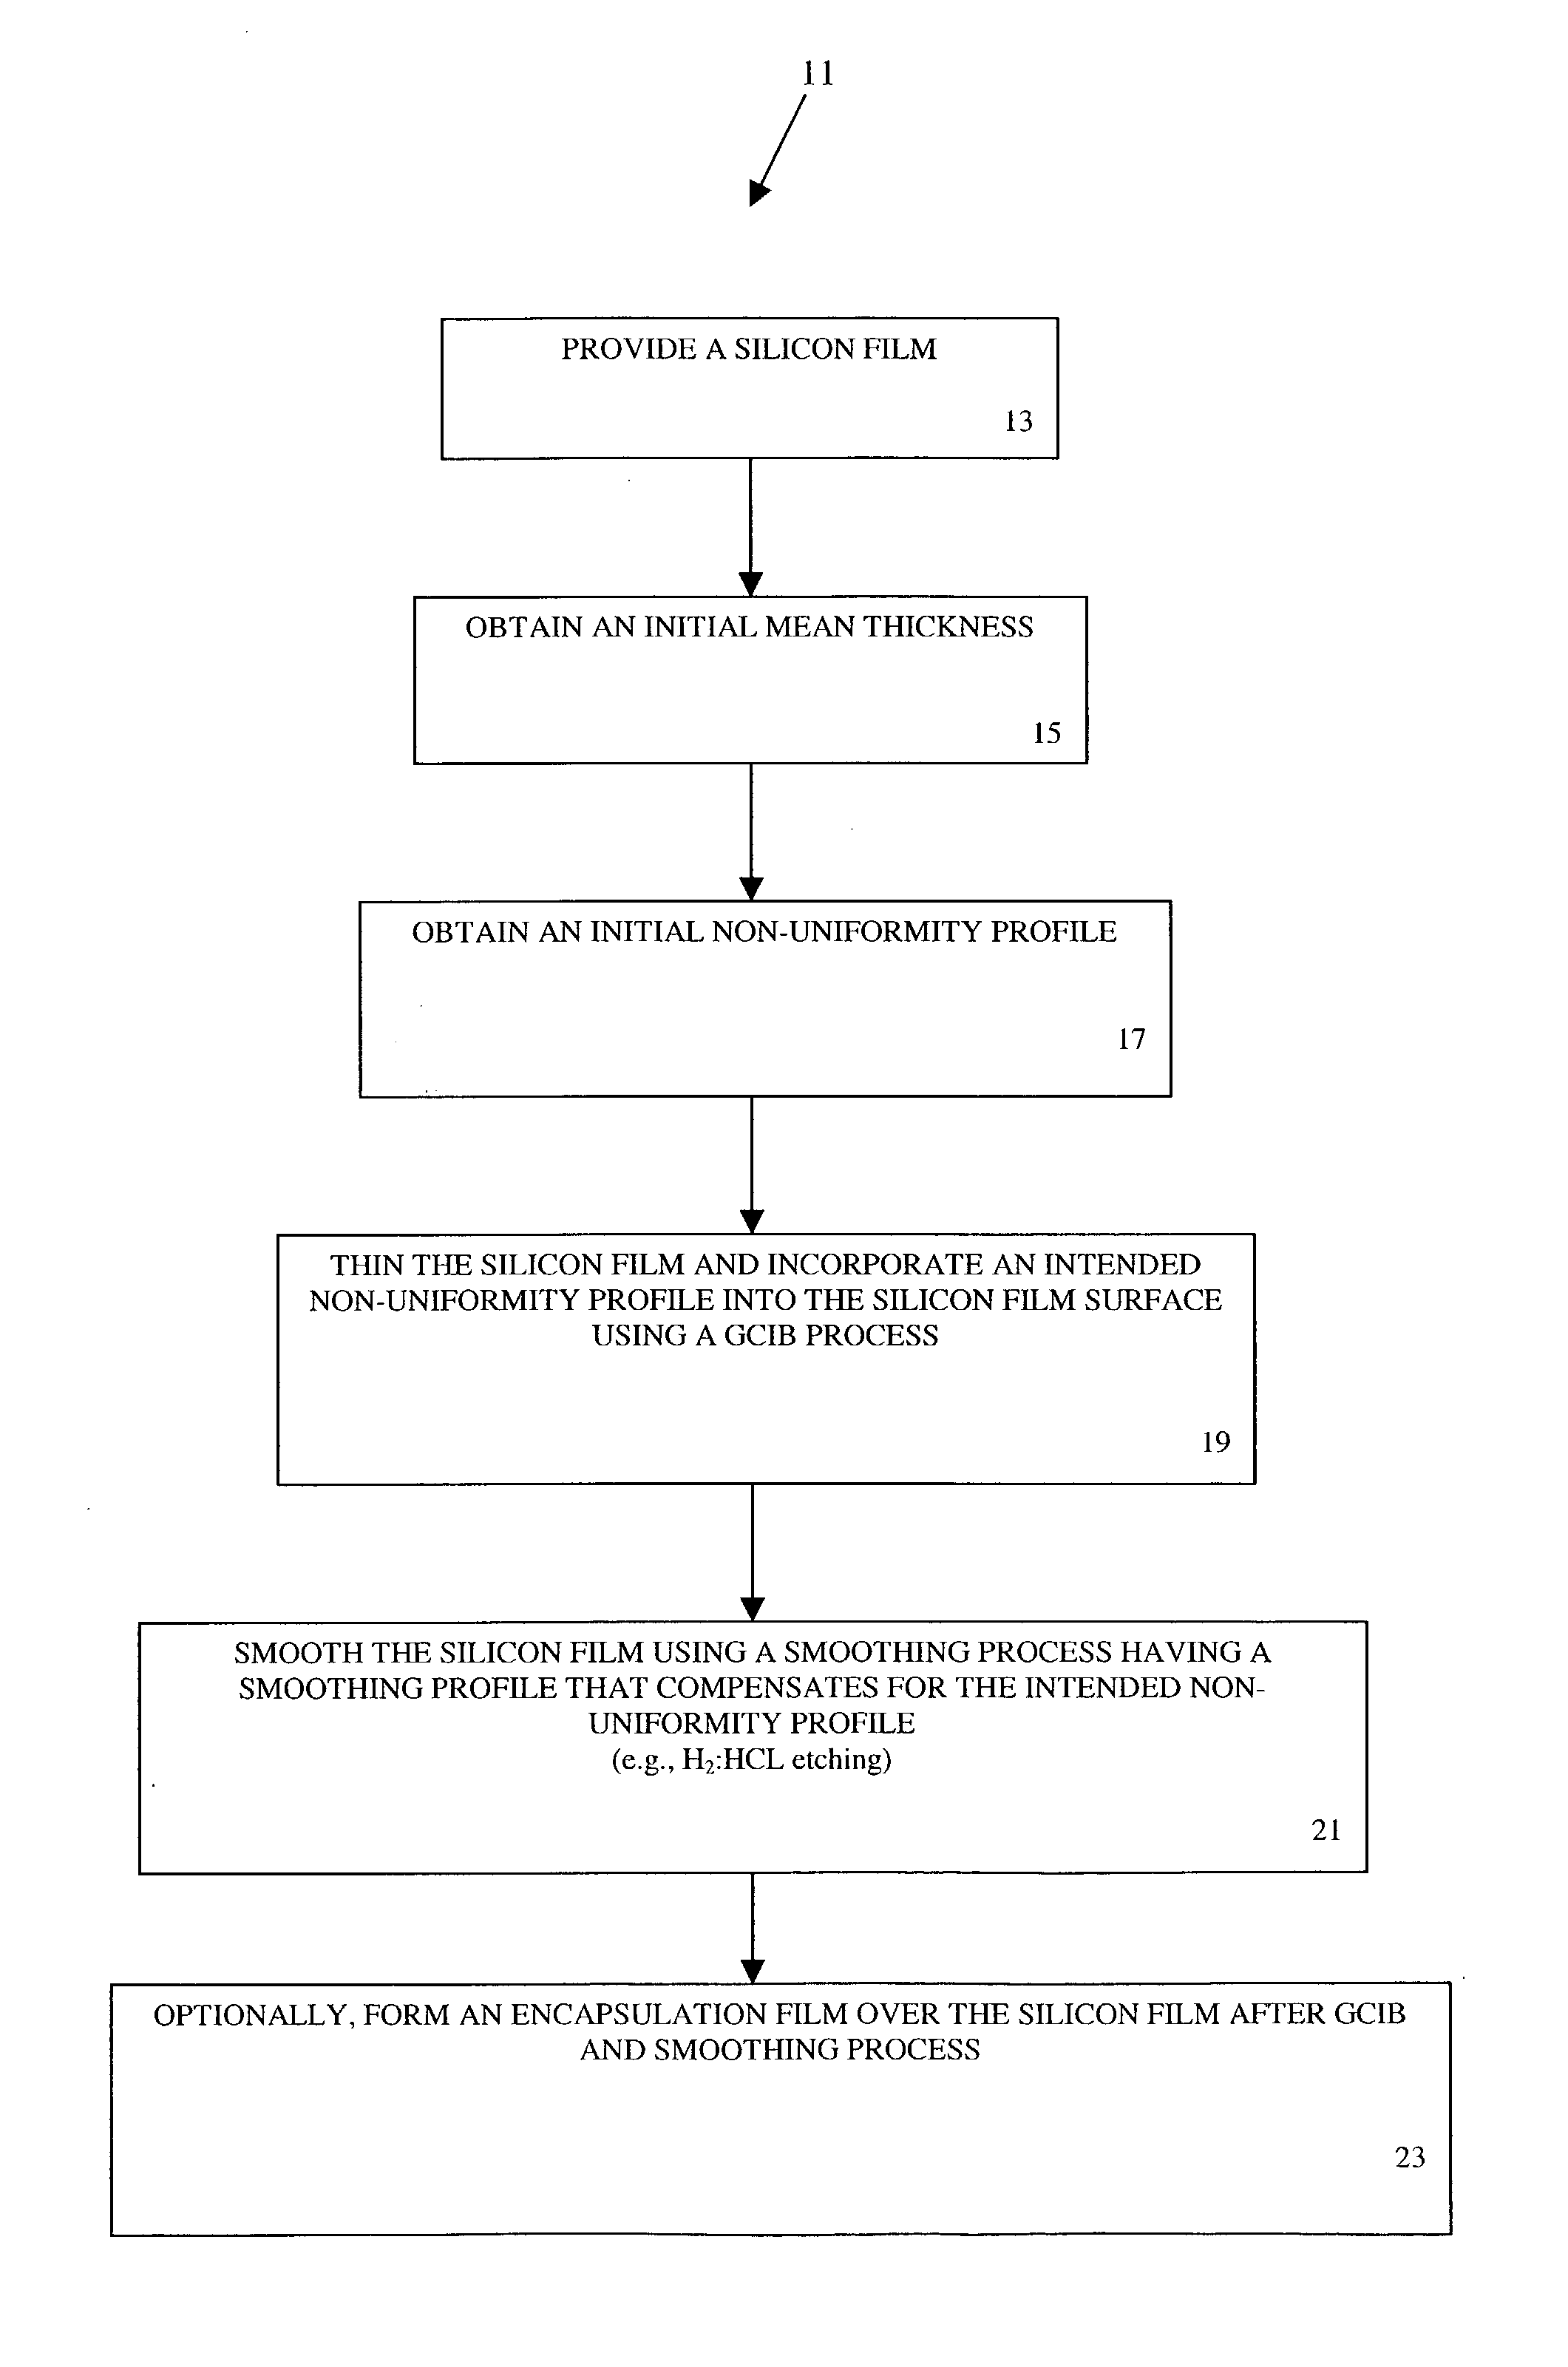 Apparatuses and methods for treating a silicon film